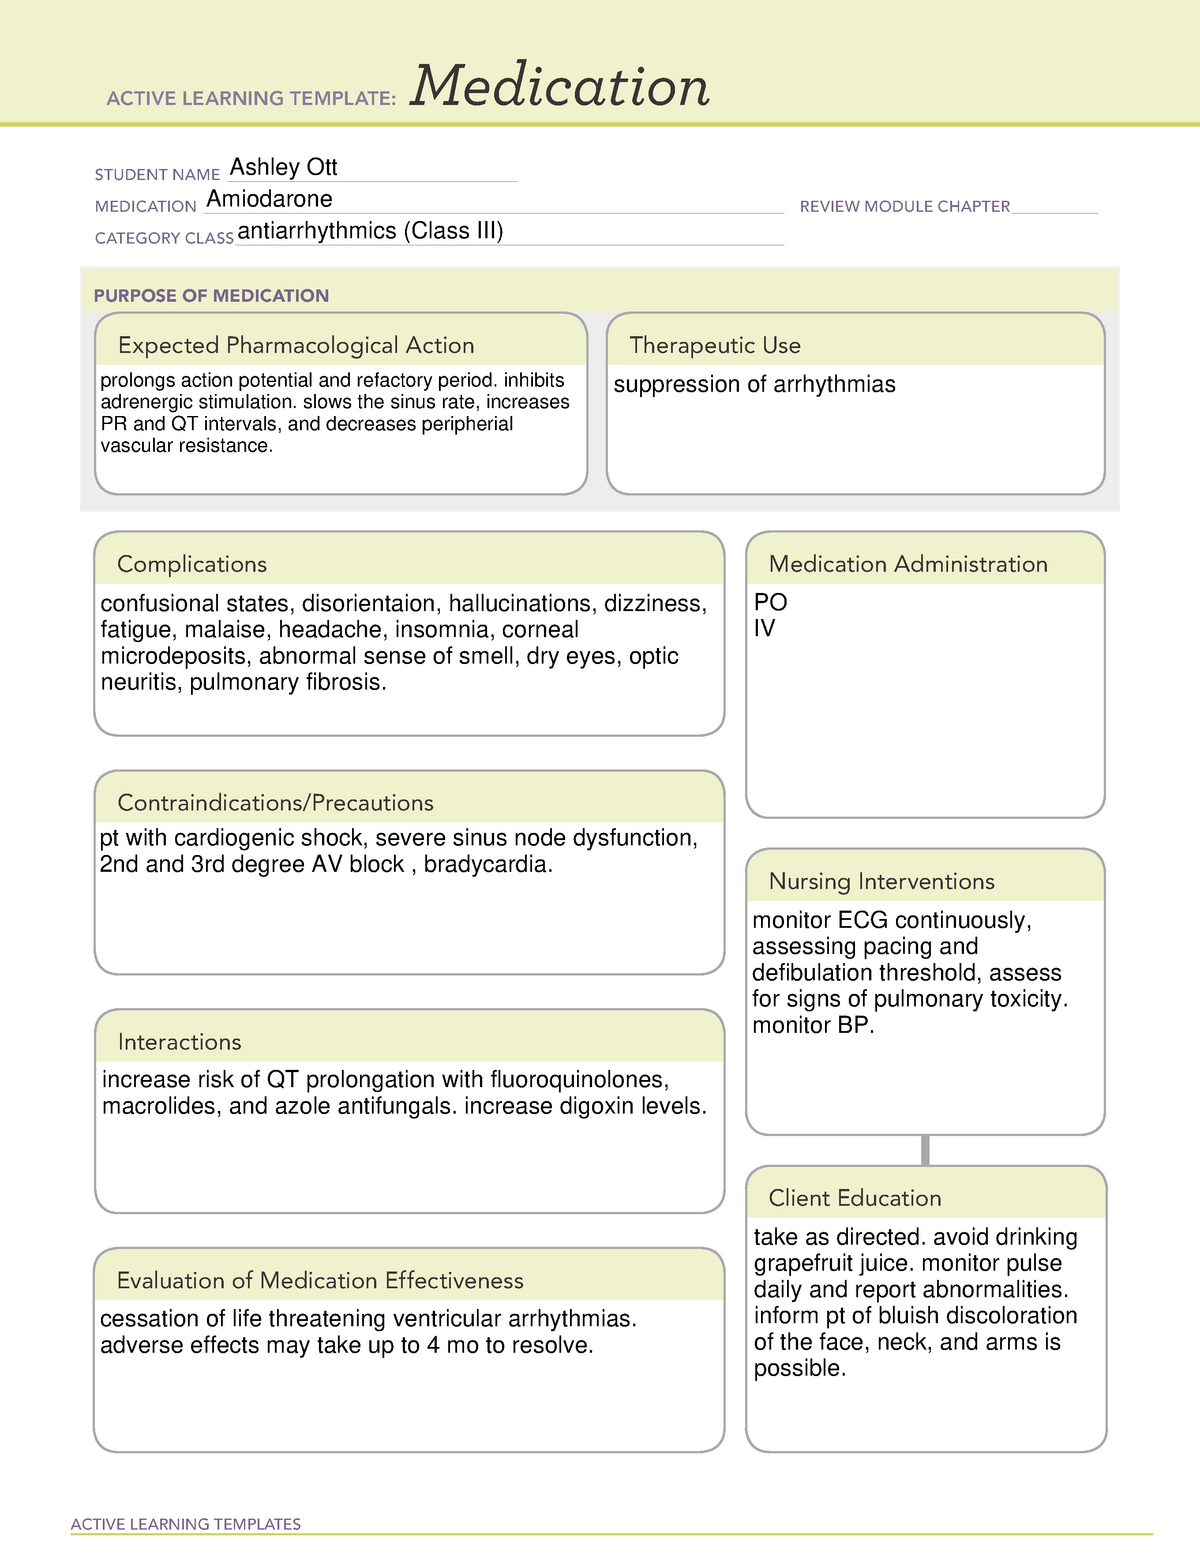 Amiodarone med card medication card ACTIVE LEARNING TEMPLATES